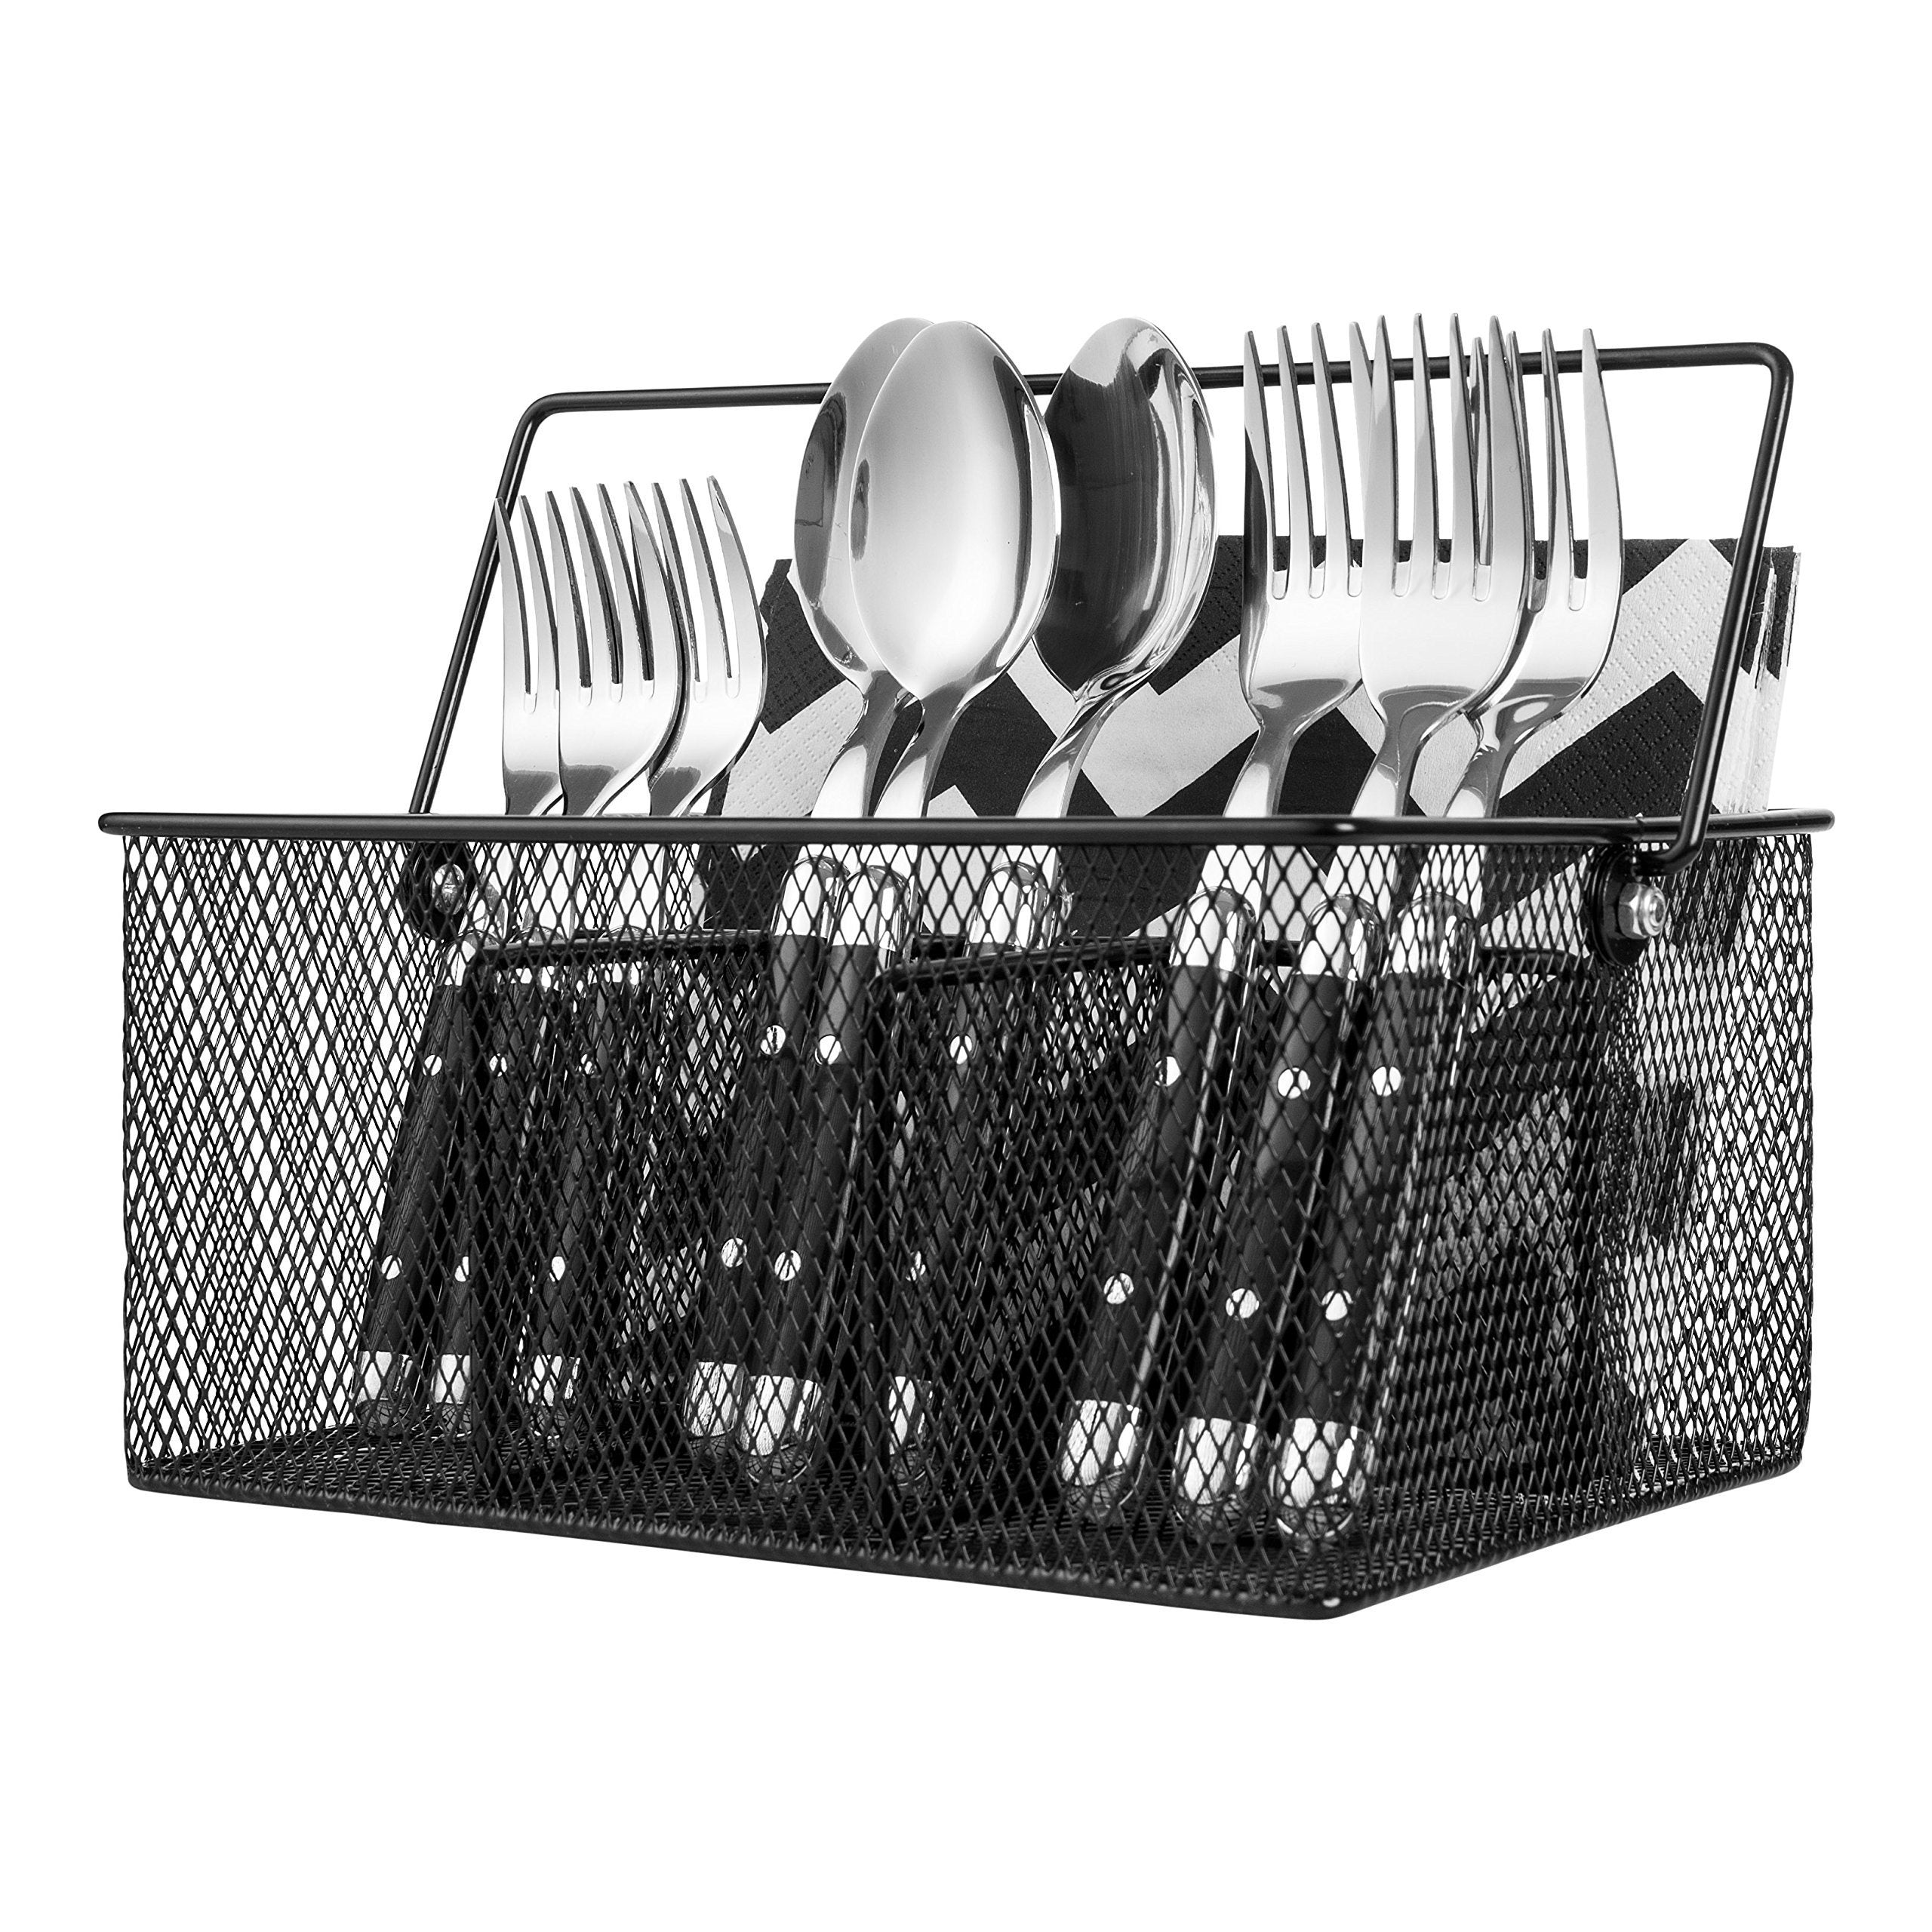 New ideal traditions kitchen utensil holder silverware condiment flatware caddy cutlery spoon utensils holder for picnic table organizer